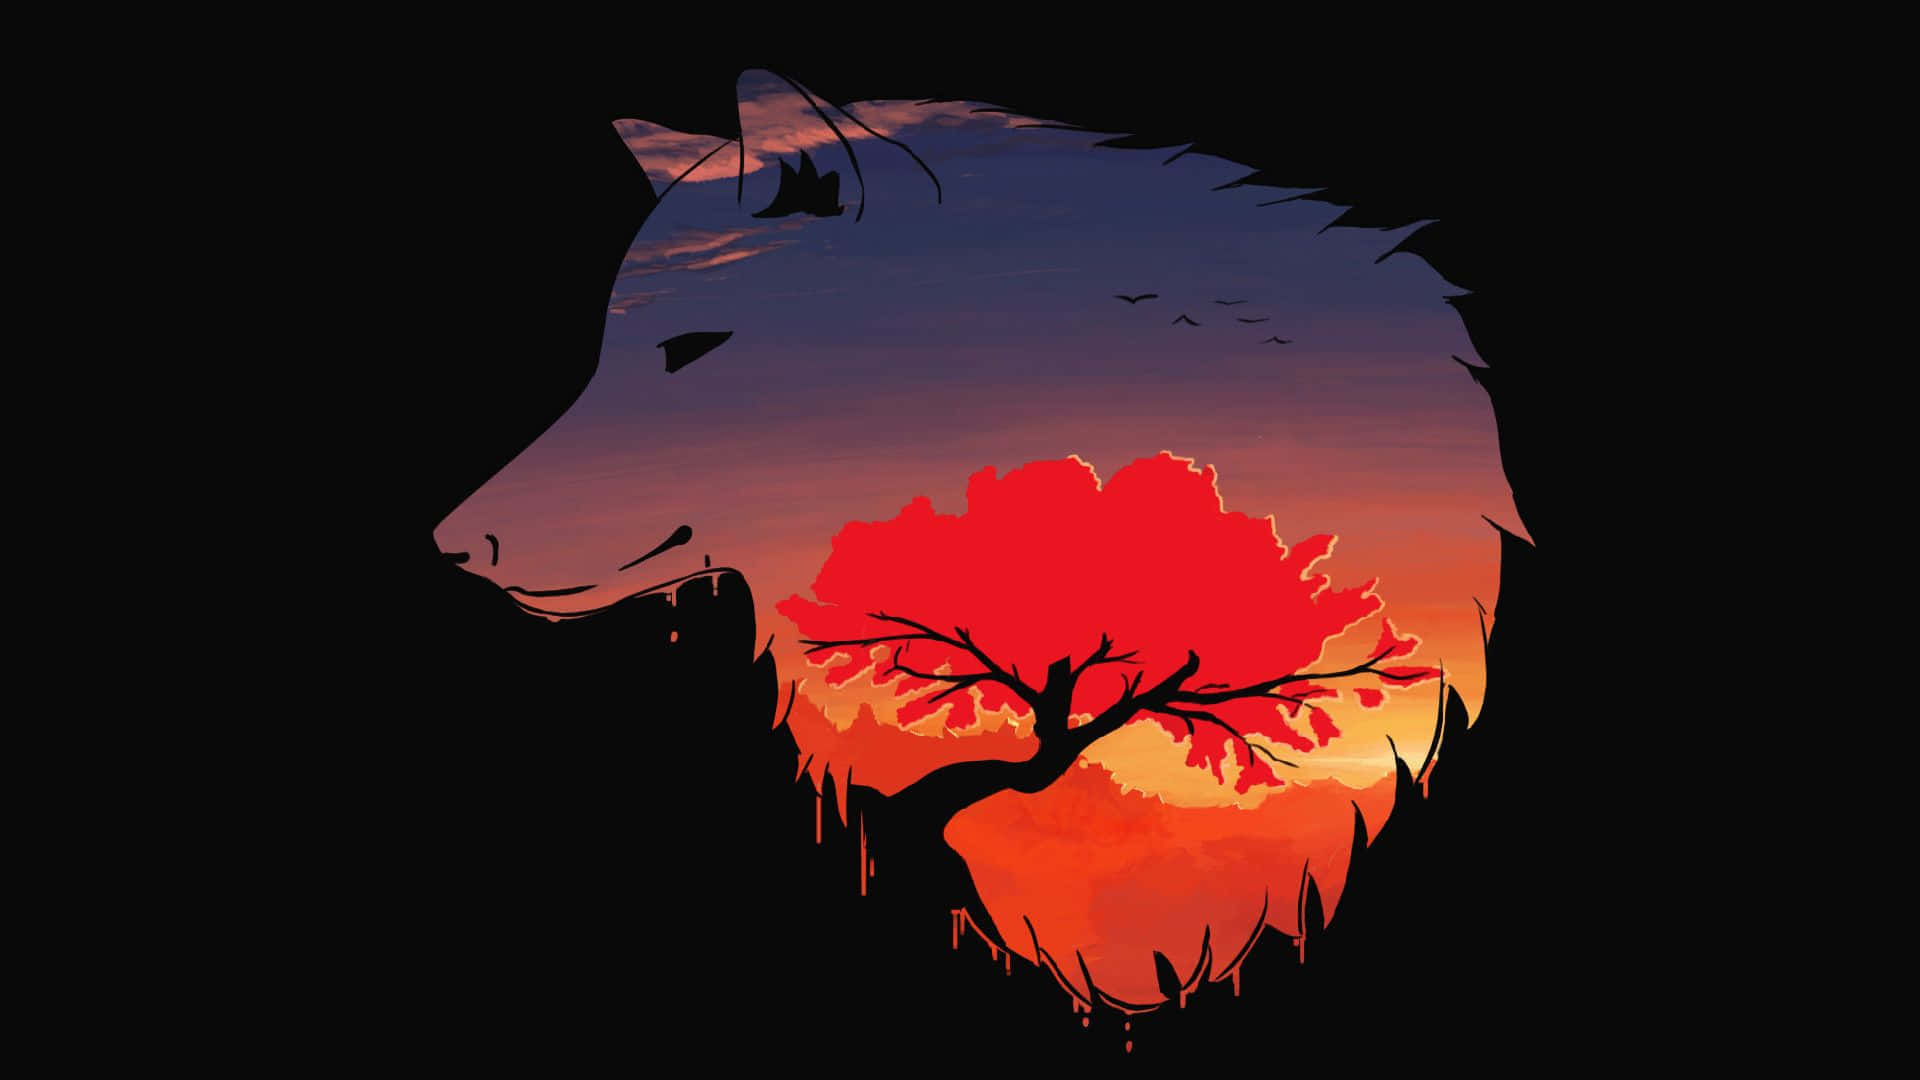 Majestic Wolf Silhouette under a Stunning Full Moon Wallpaper